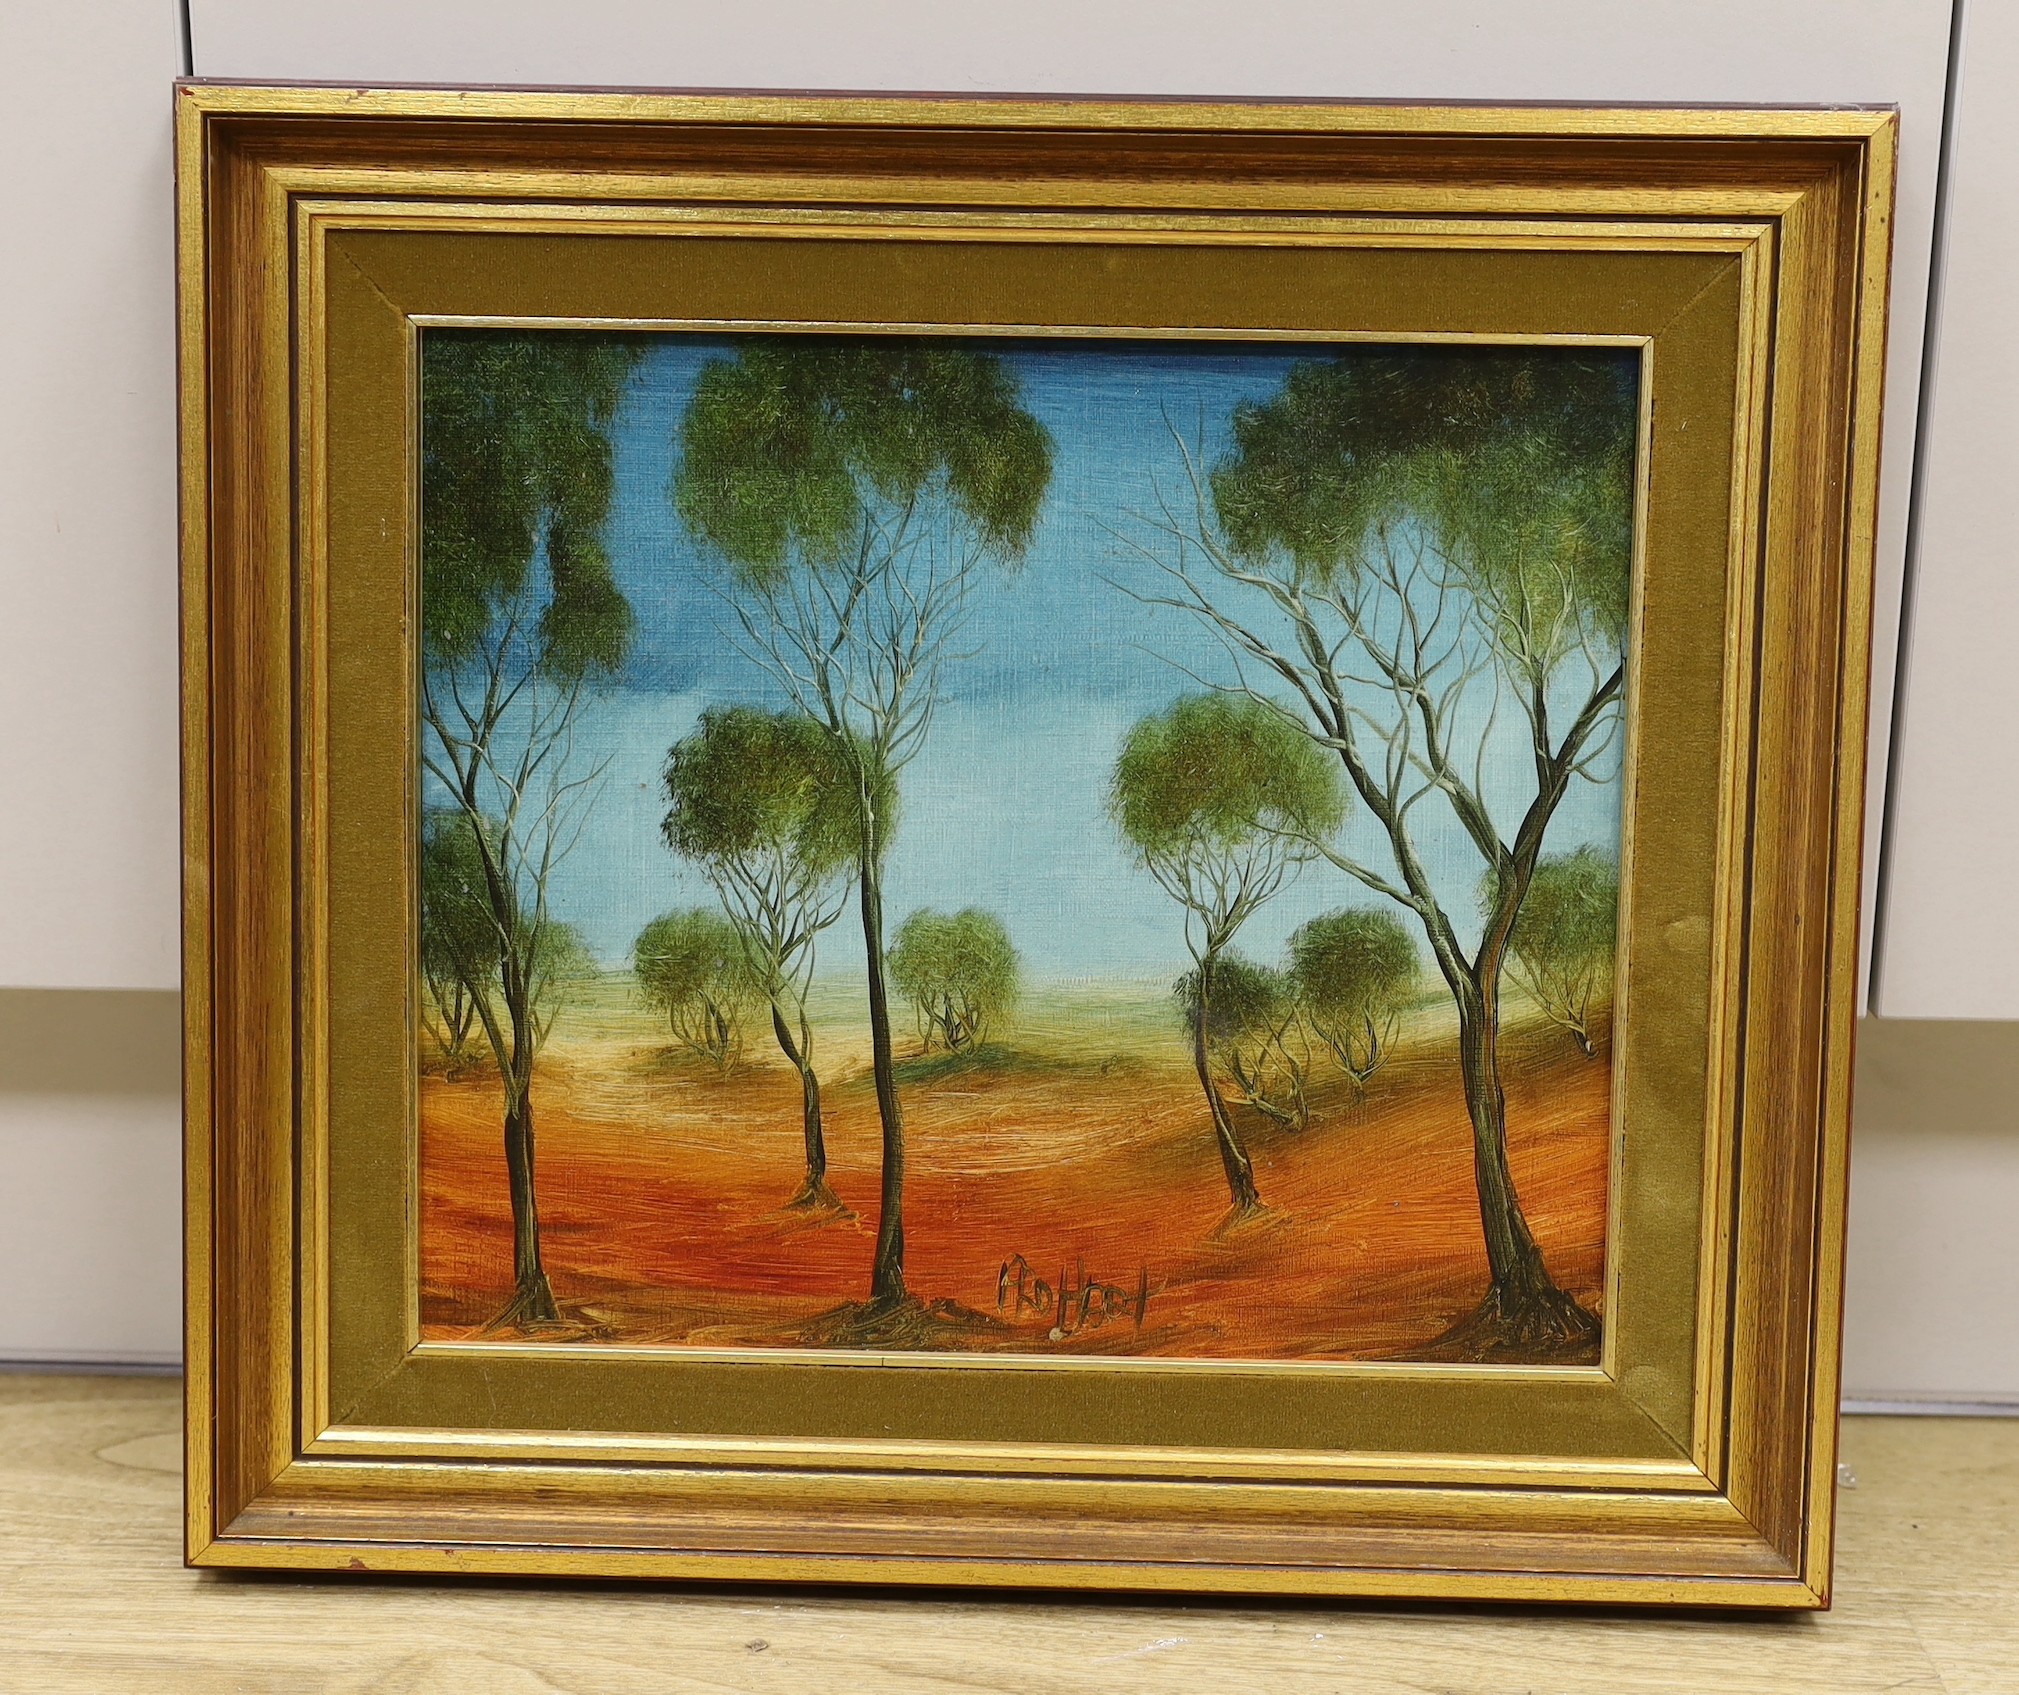 Kevin Charles (Pro) Hart (Australian, 1928-2006), oil on canvas board, Trees in a landscape, signed, 30 x 35cm